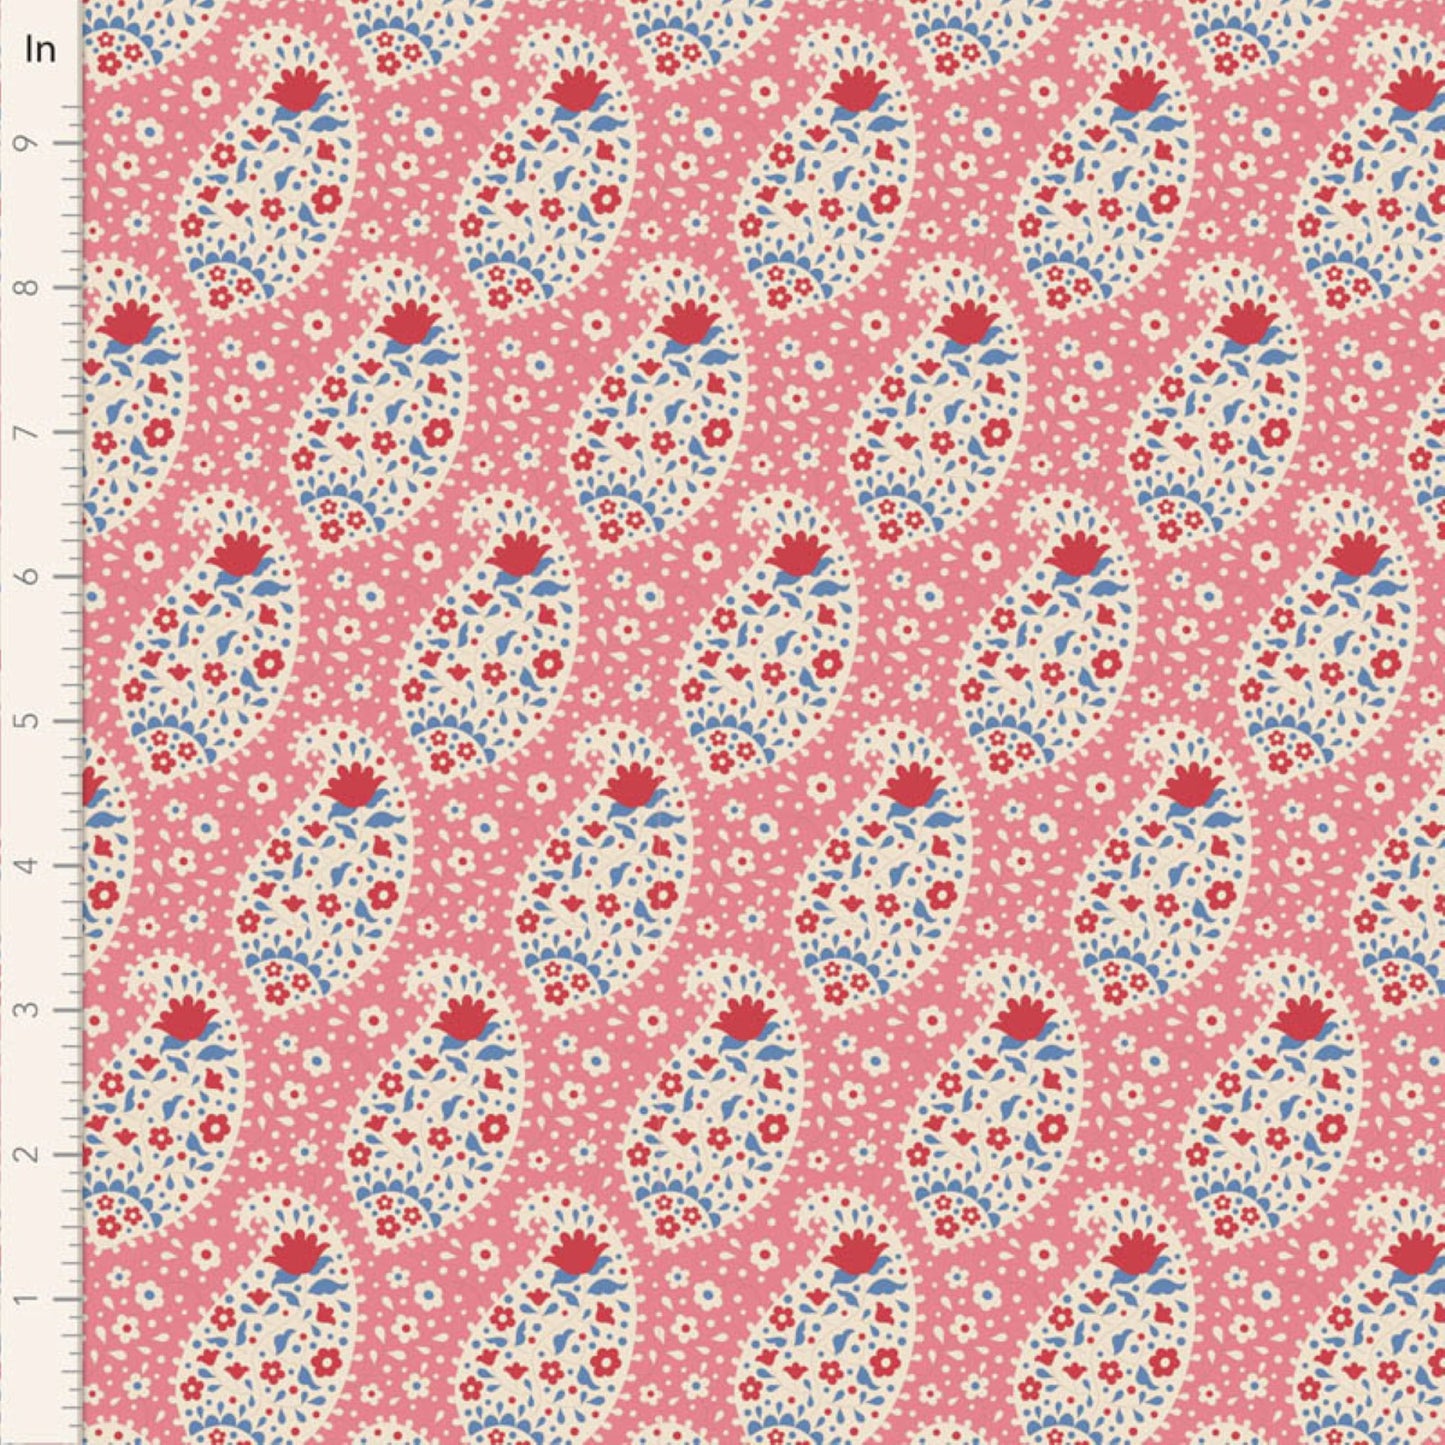 Tilda Jubilee Teardrop pink floral cotton quilt fabric by the FQ + More